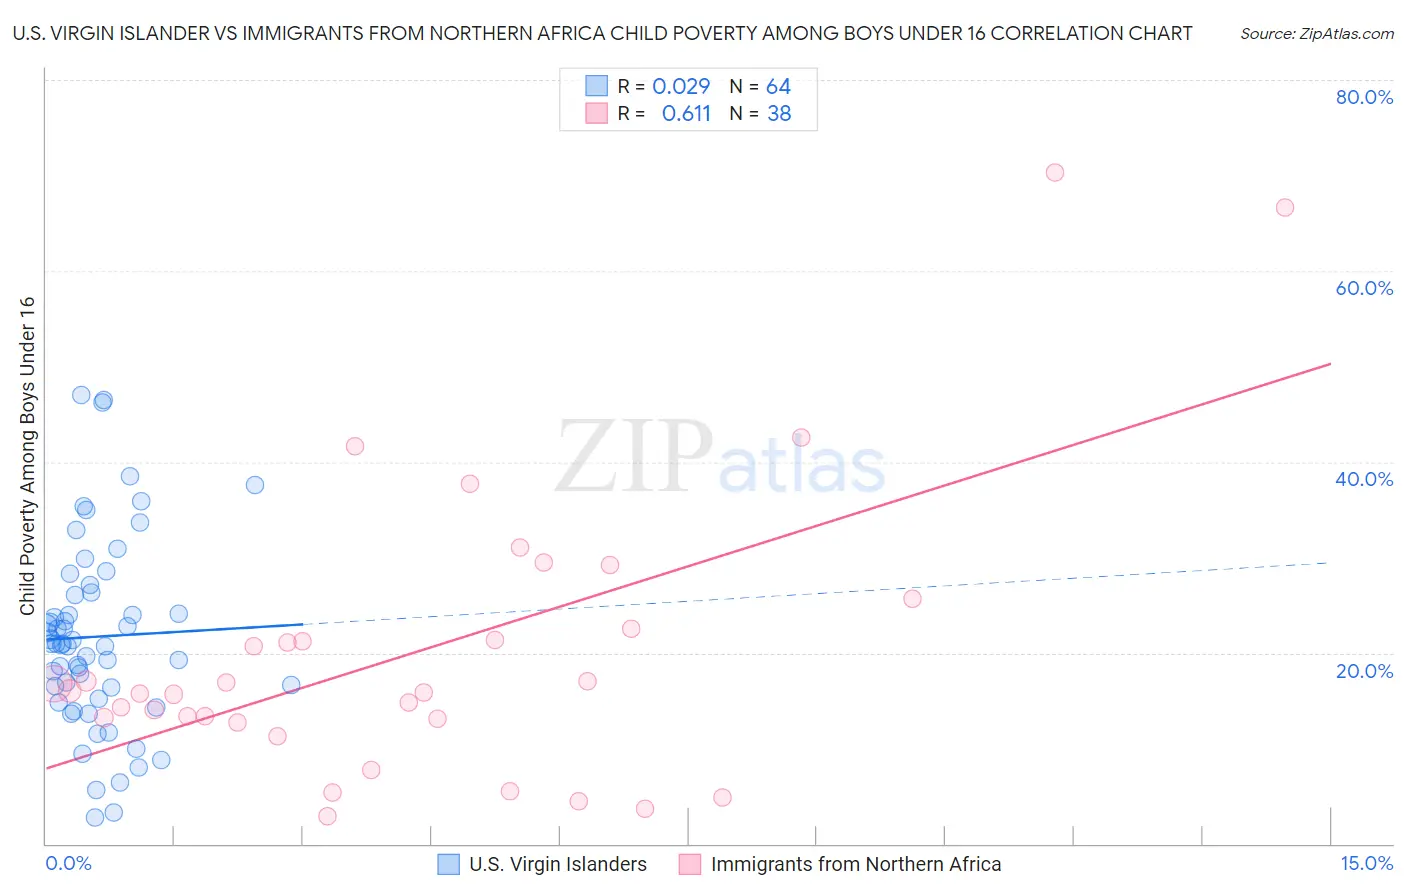 U.S. Virgin Islander vs Immigrants from Northern Africa Child Poverty Among Boys Under 16